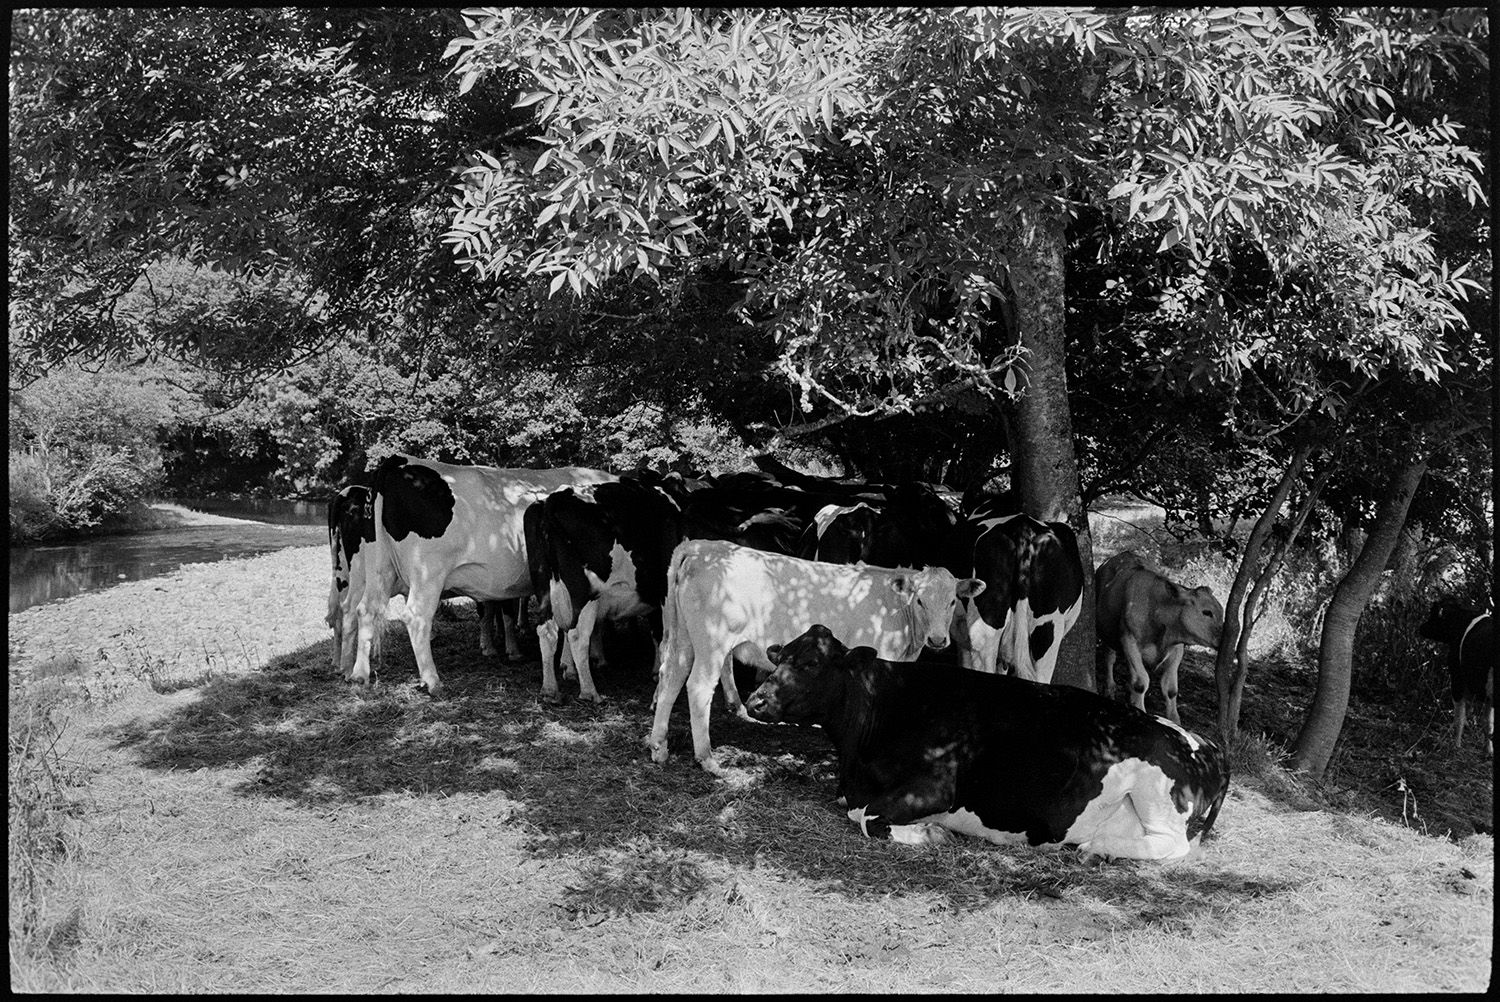 Cattle sheltering from sun under trees. 
[Cattle keeping cool from the sun in the shade of a tree in a field at Halsdon, Dolton. The river Torridge can be seen in the background.]